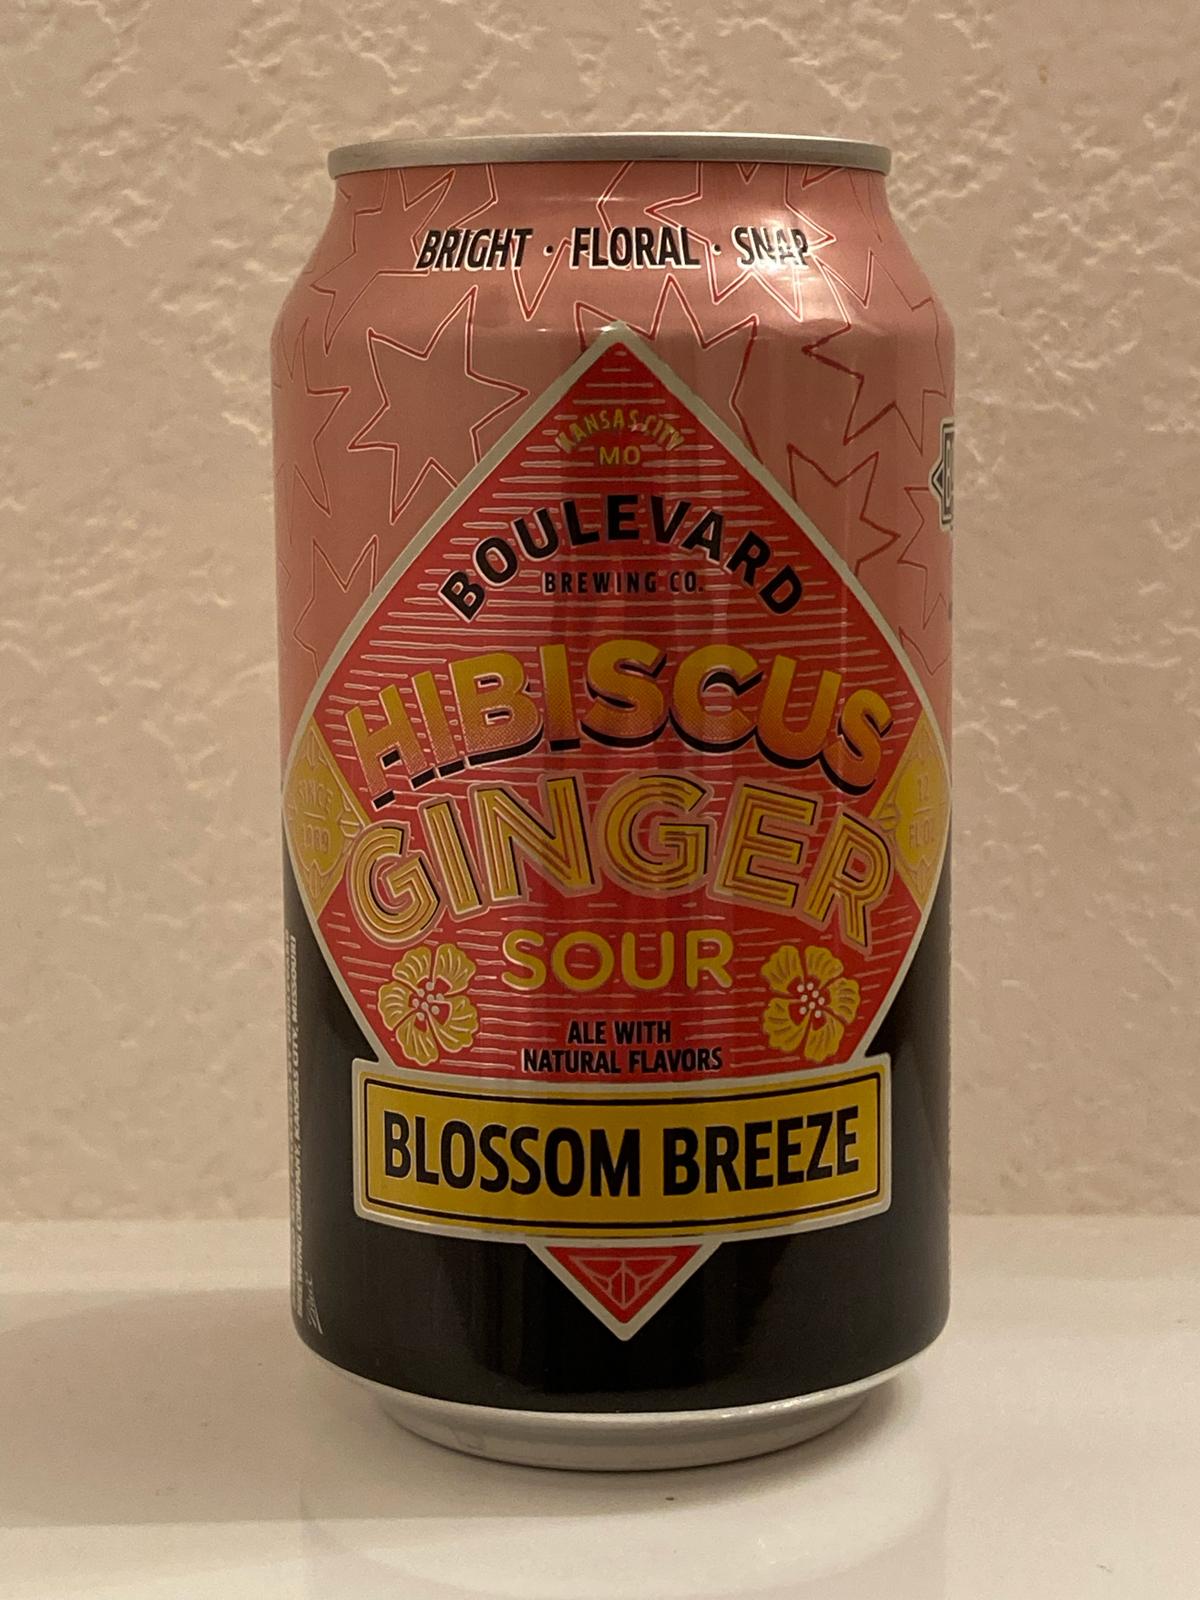 Blossom Breeze Hibiscus Ginger Sour